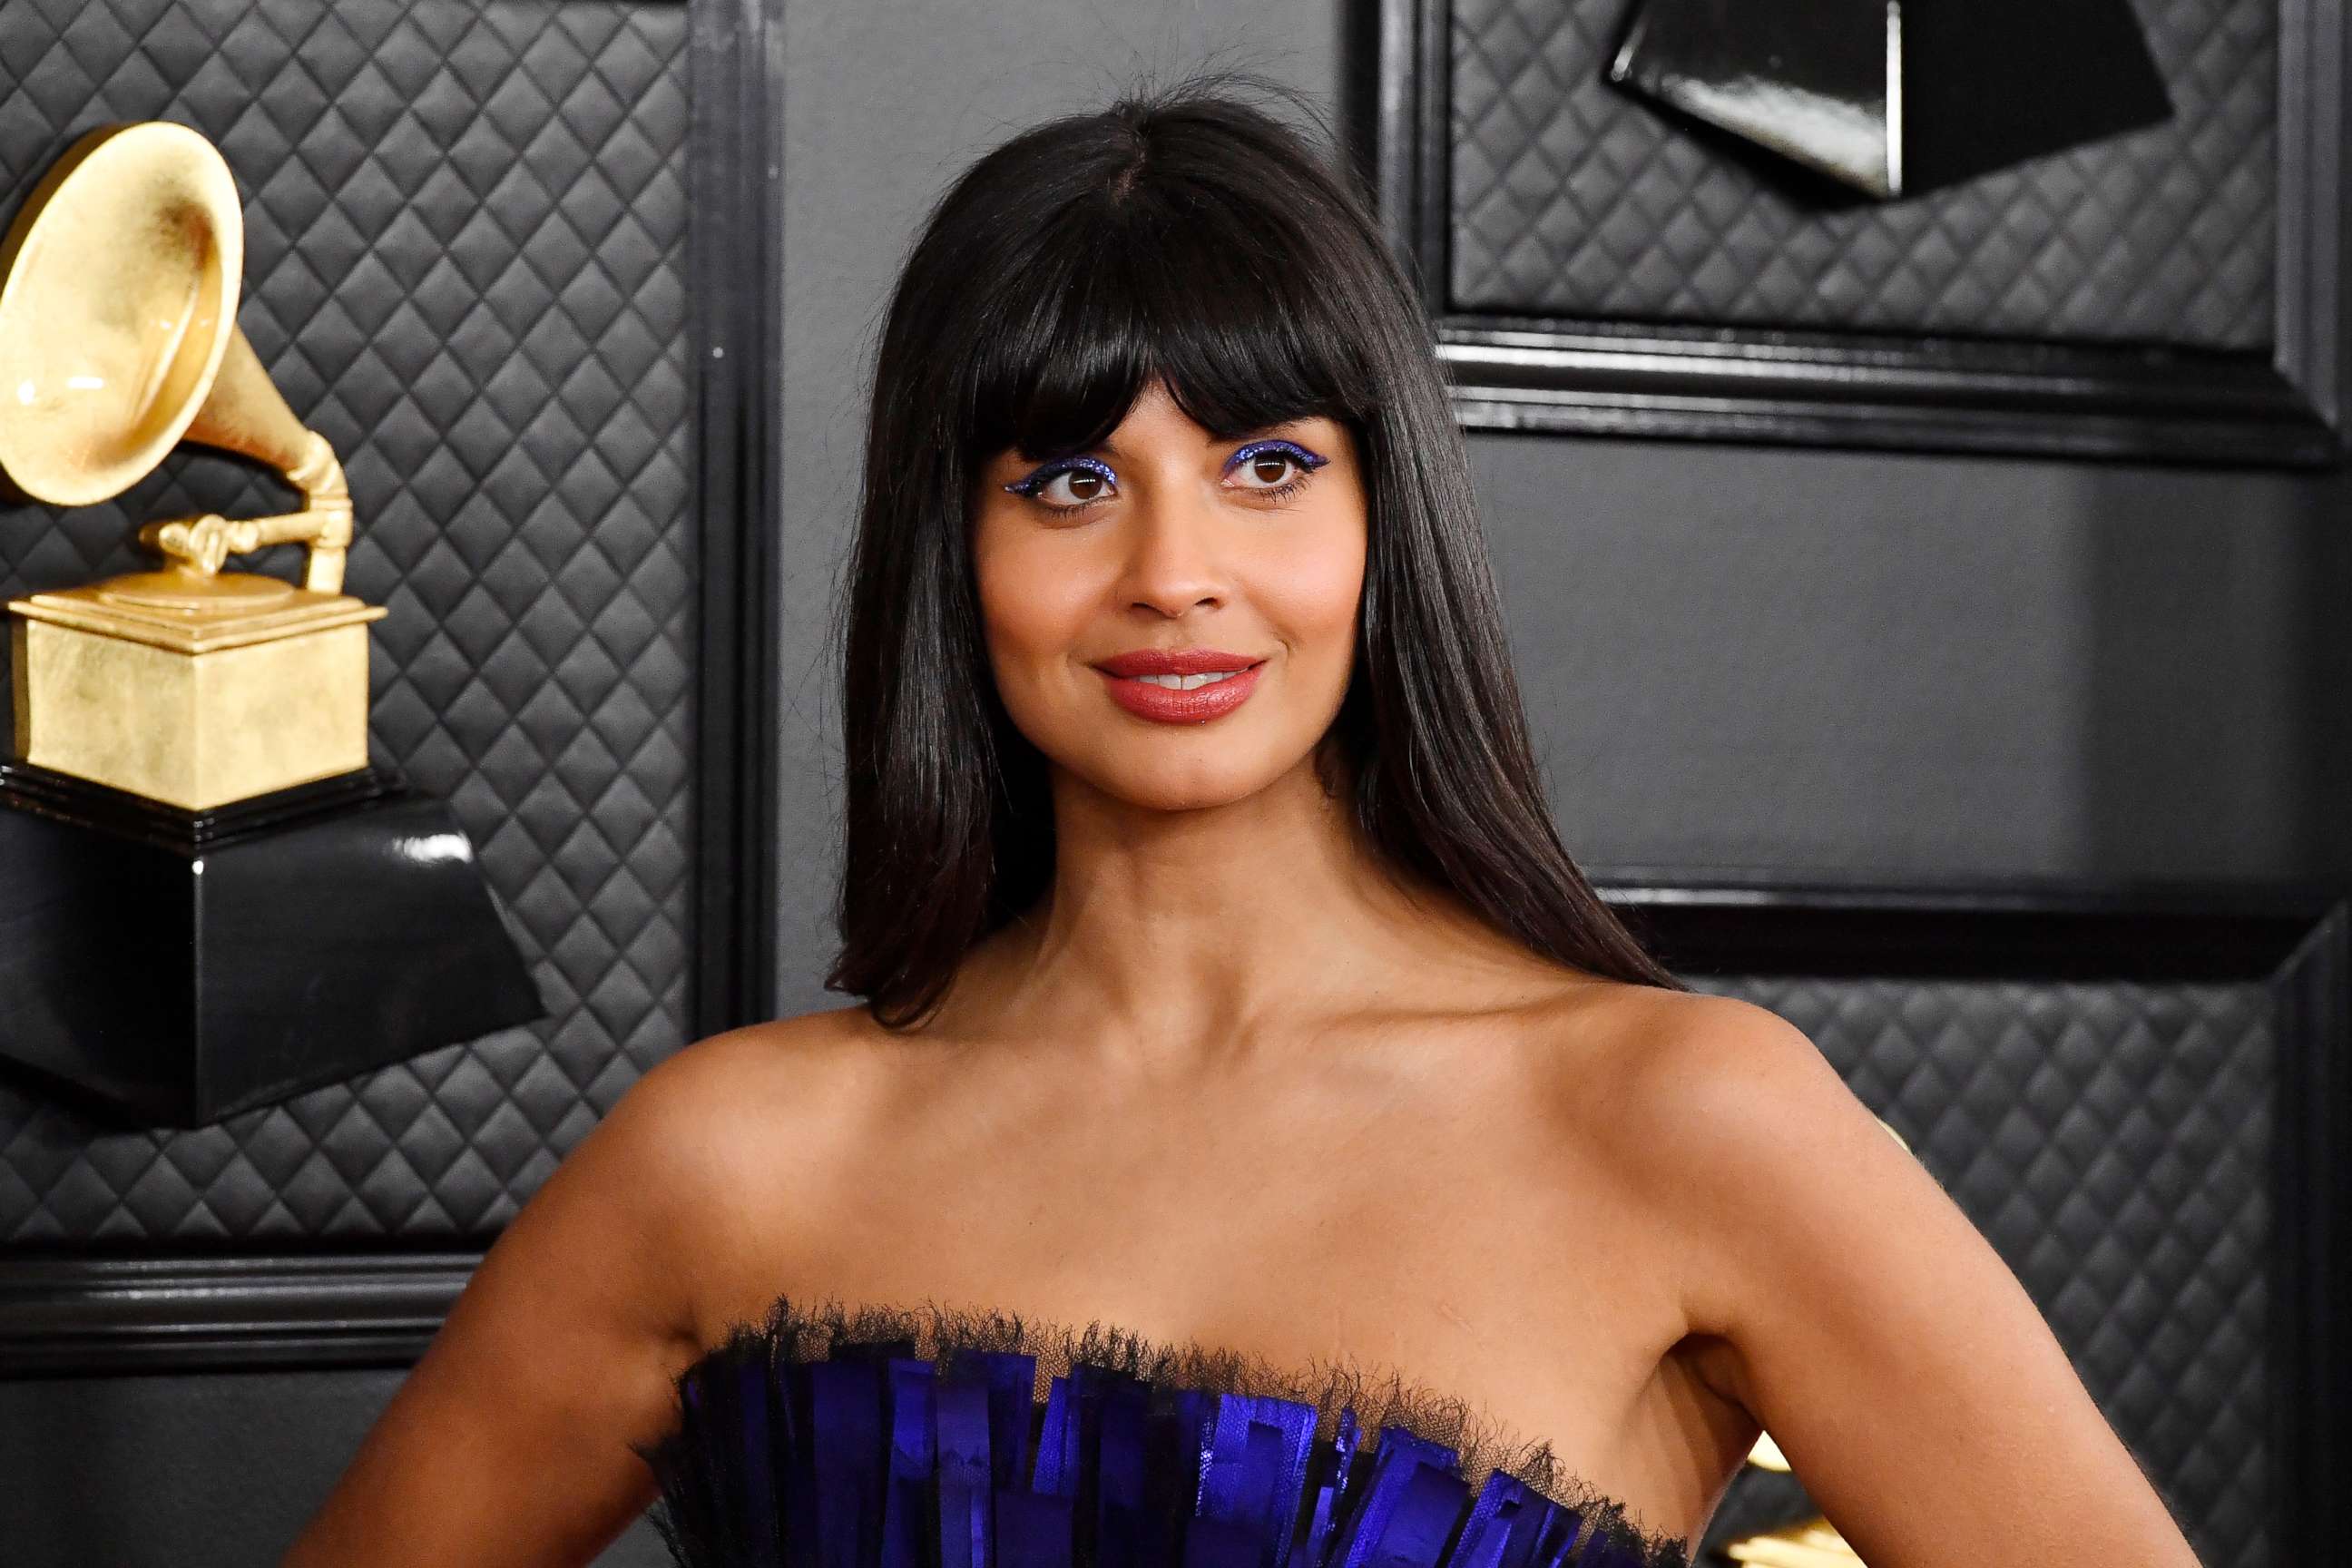 PHOTO: Jameela Jamil attends the 62nd Annual Grammy Awards at STAPLES Center on Jan. 26, 2020 in Los Angeles.